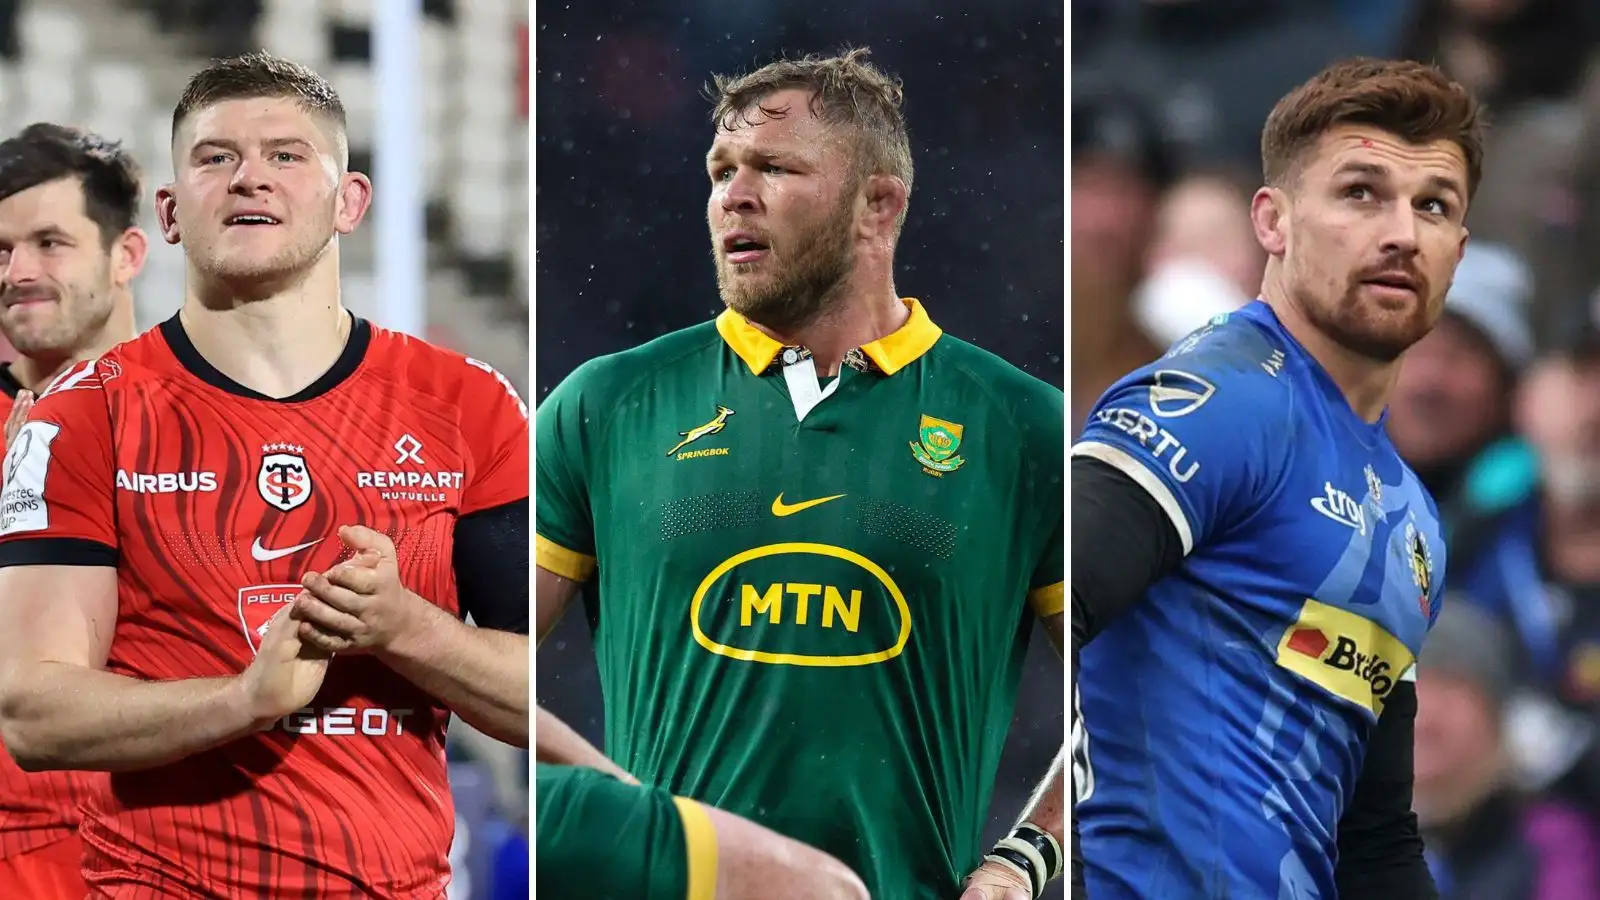 Rugby rumours and transfers: Jack Willis, Duane Vermeulen, Henry Slade and more